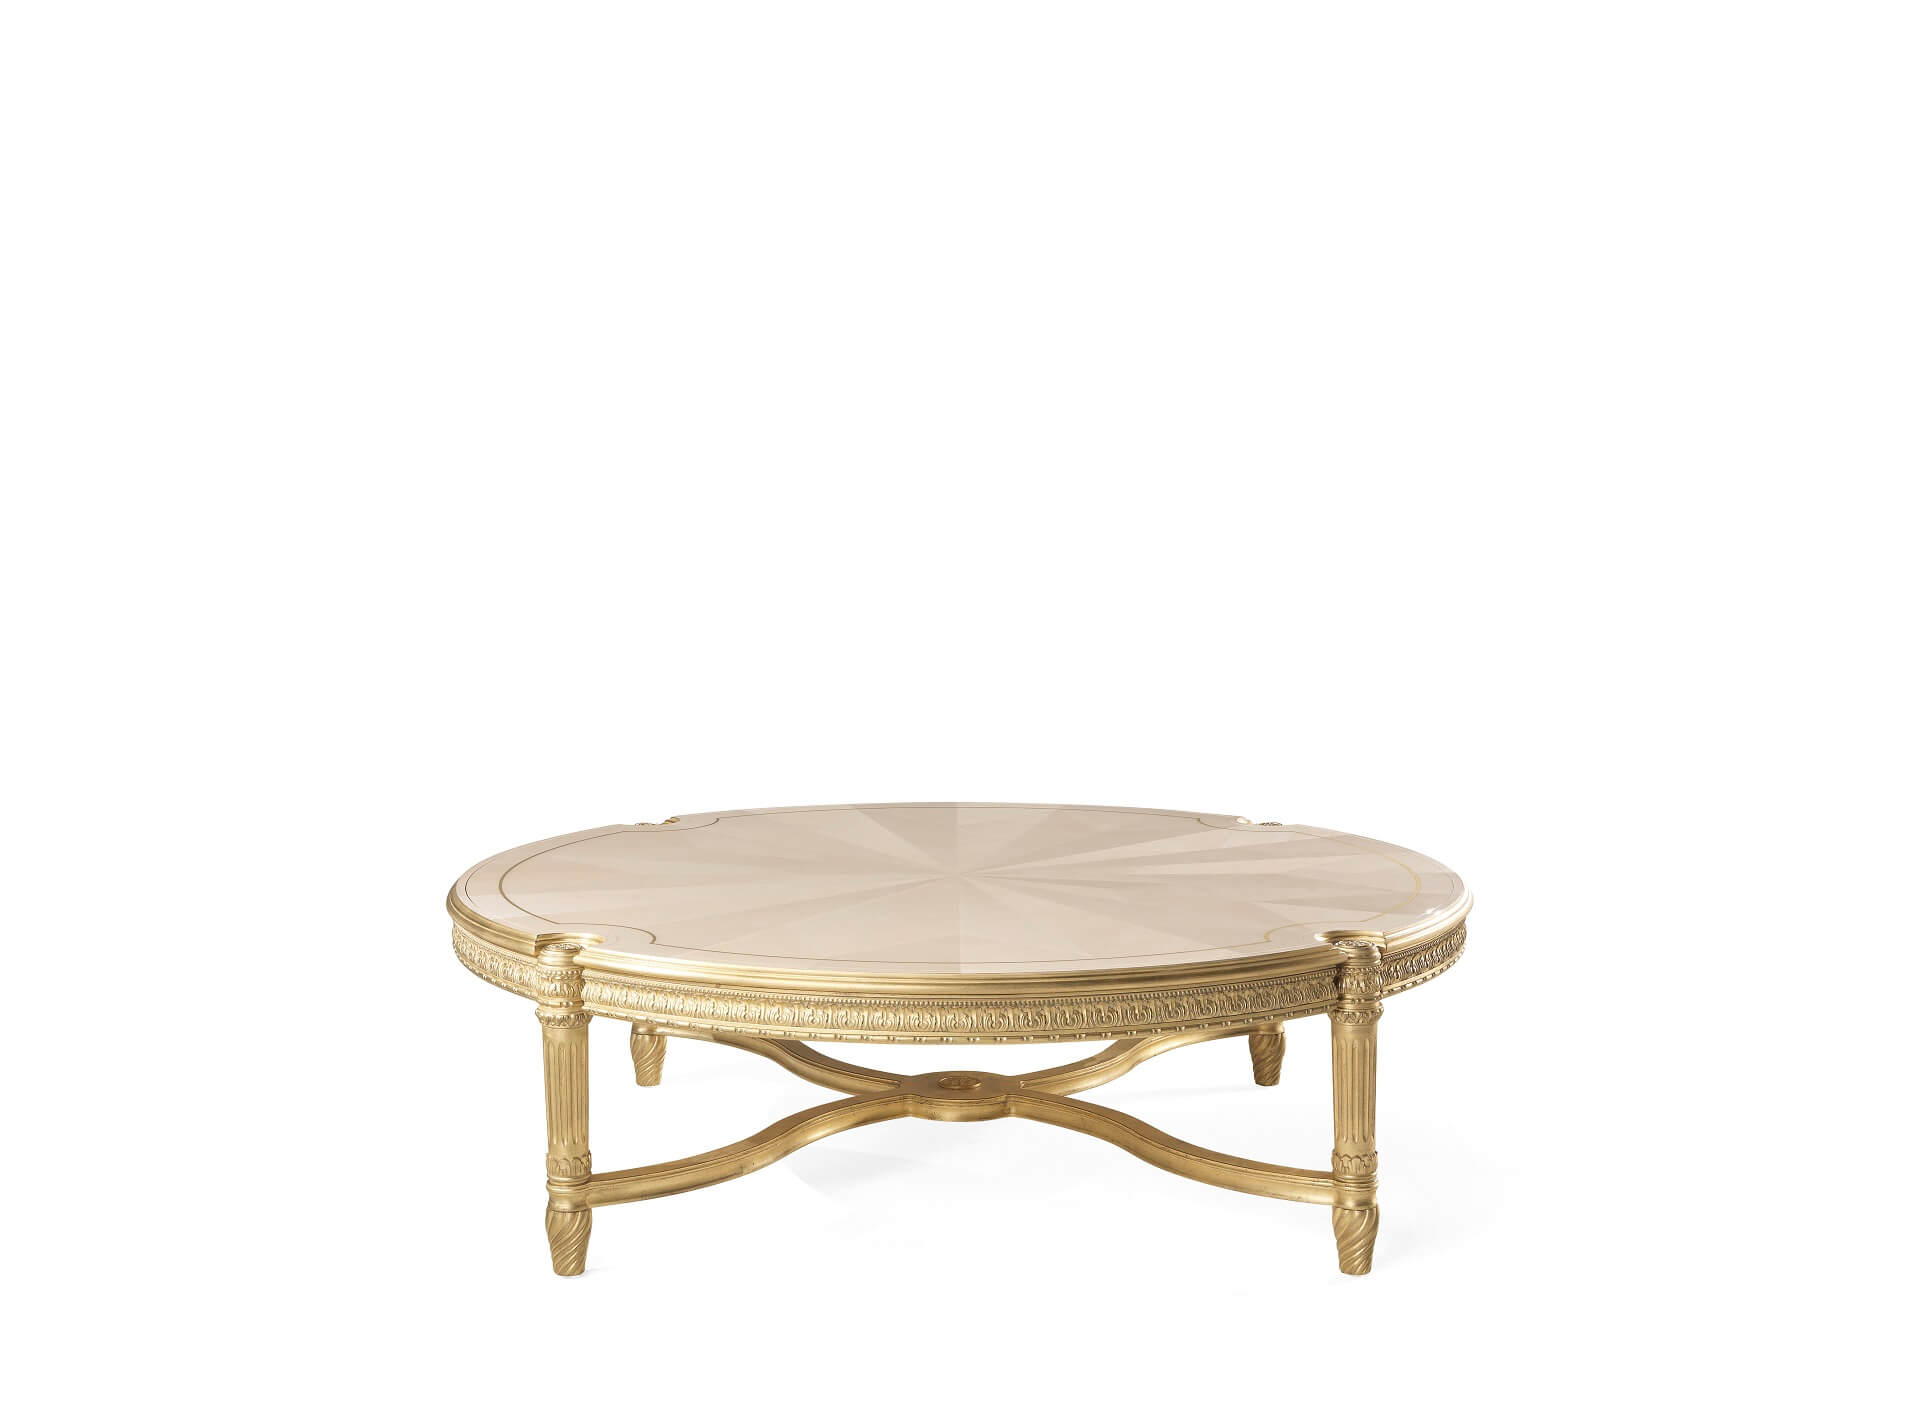 Jumbo Collection Boulevard central table